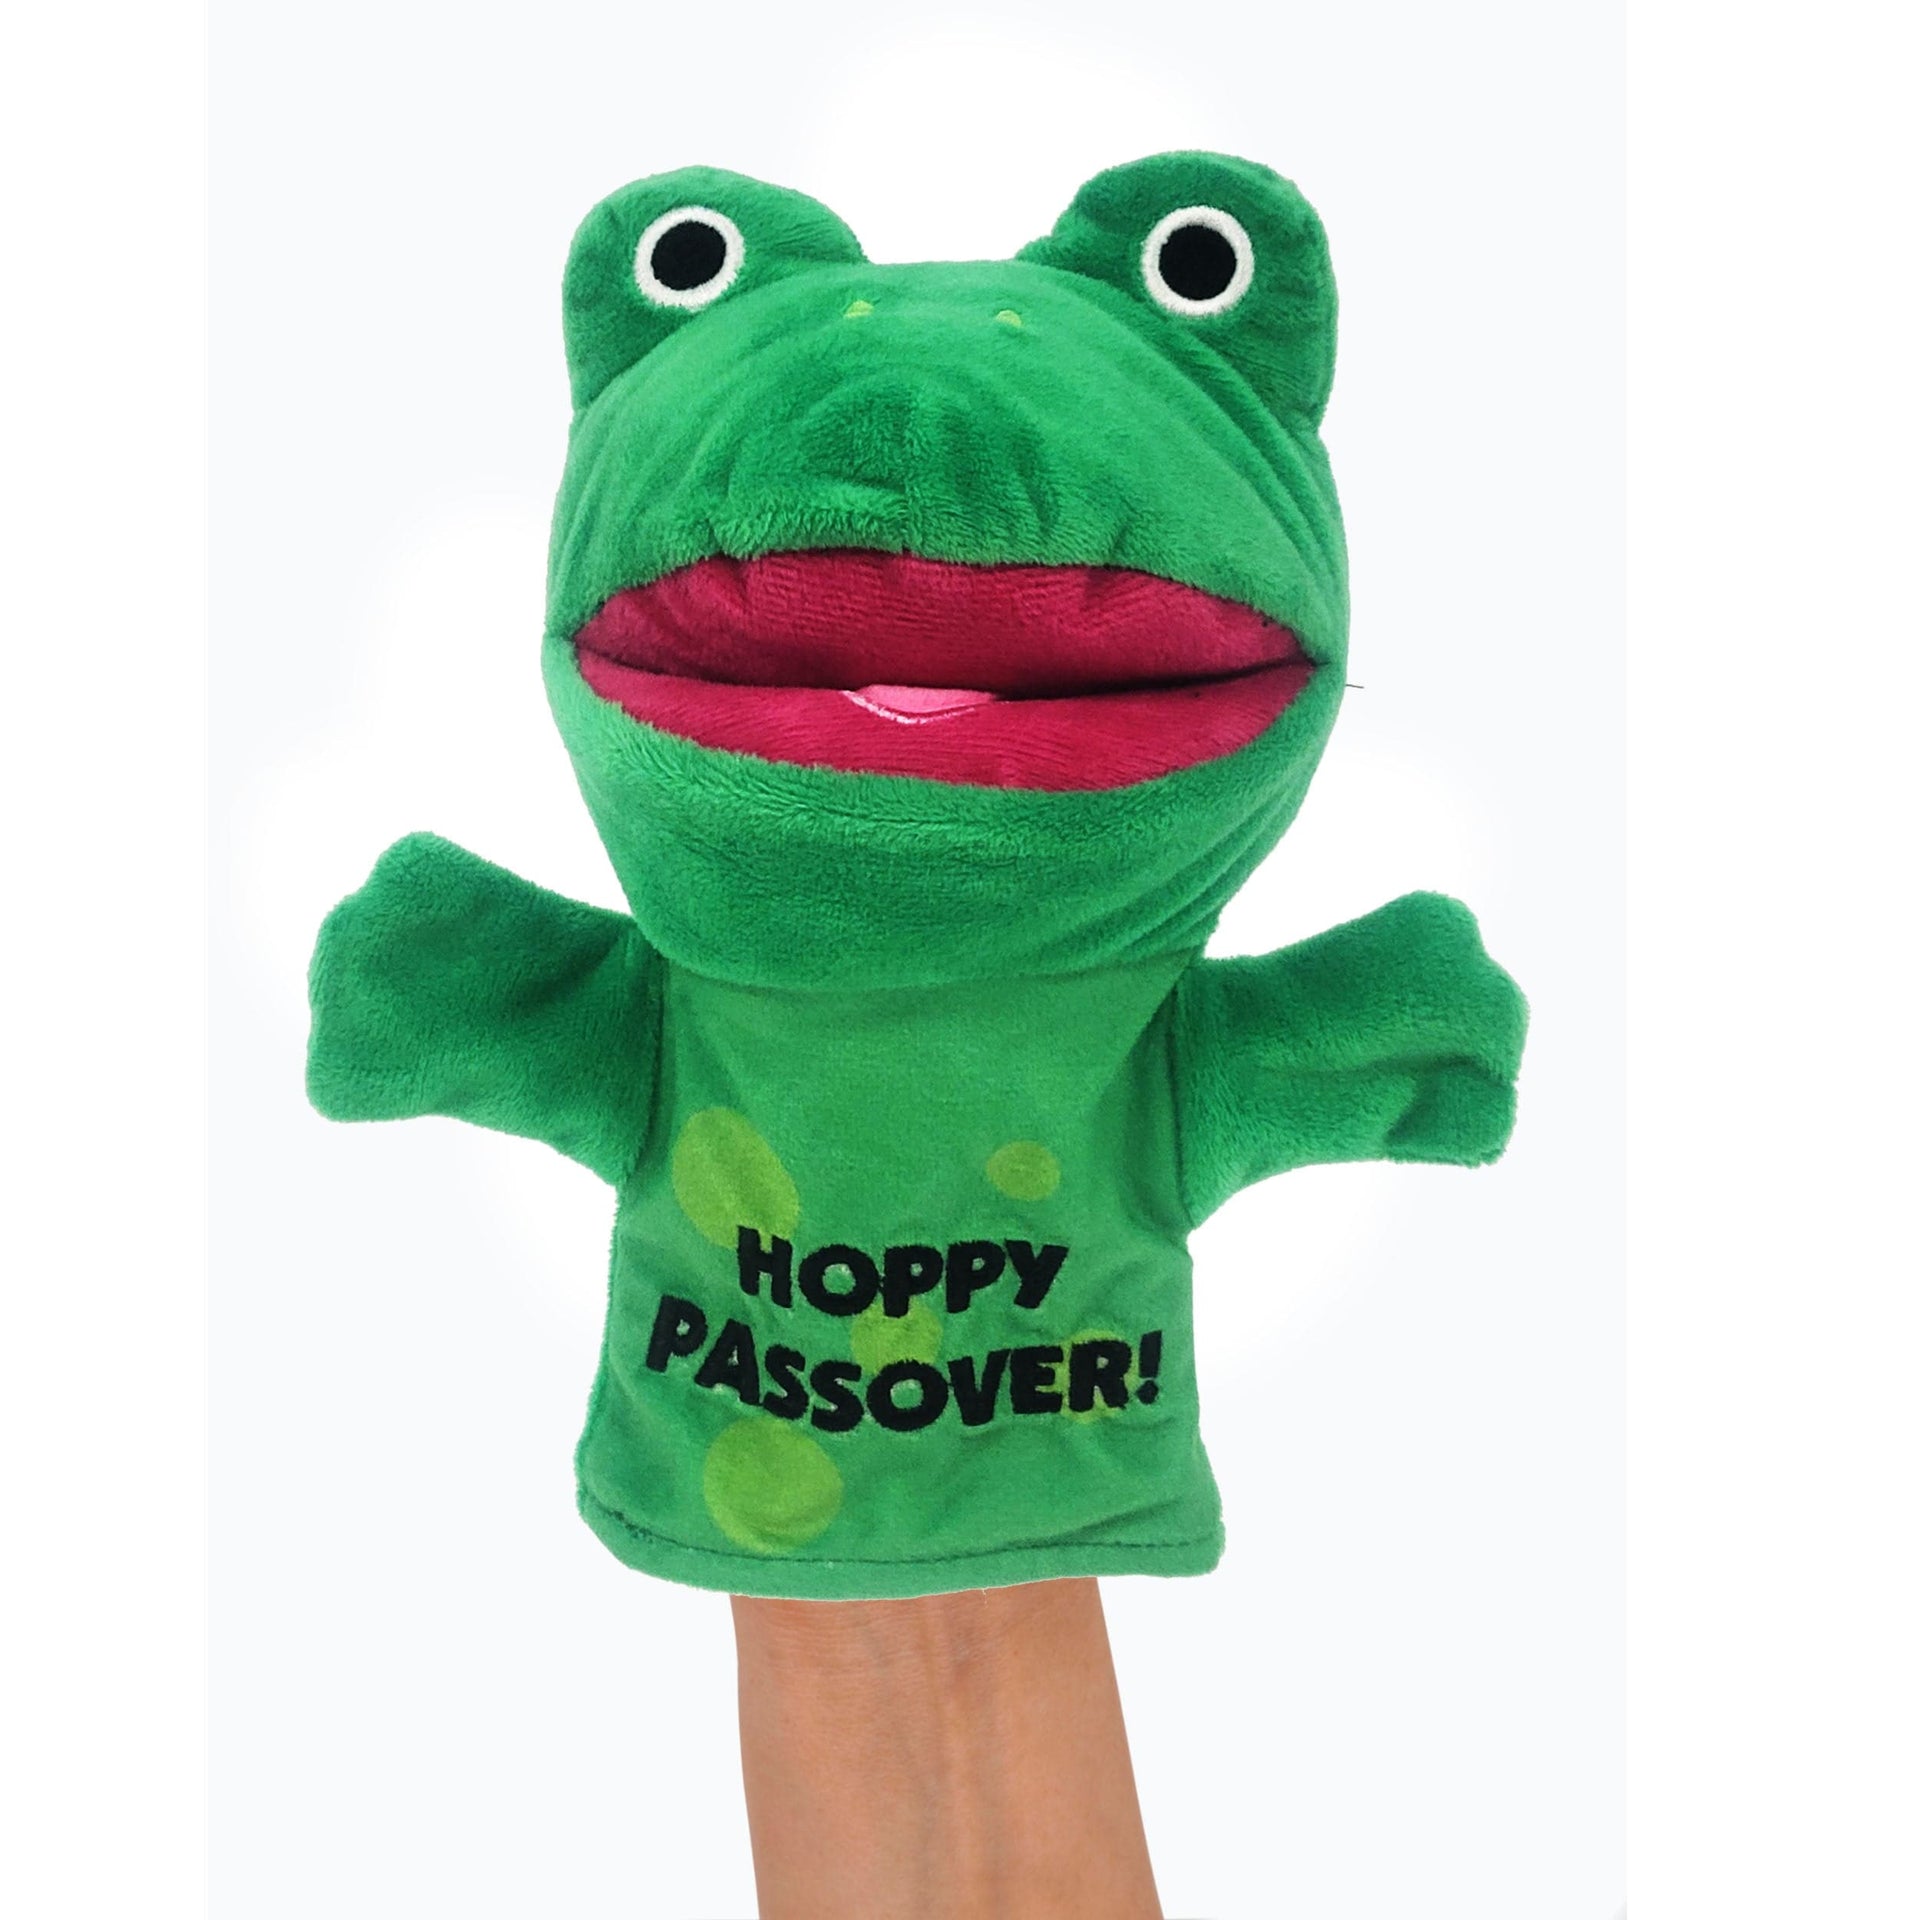 Rite Lite Toys Passover Frog Hand Puppet